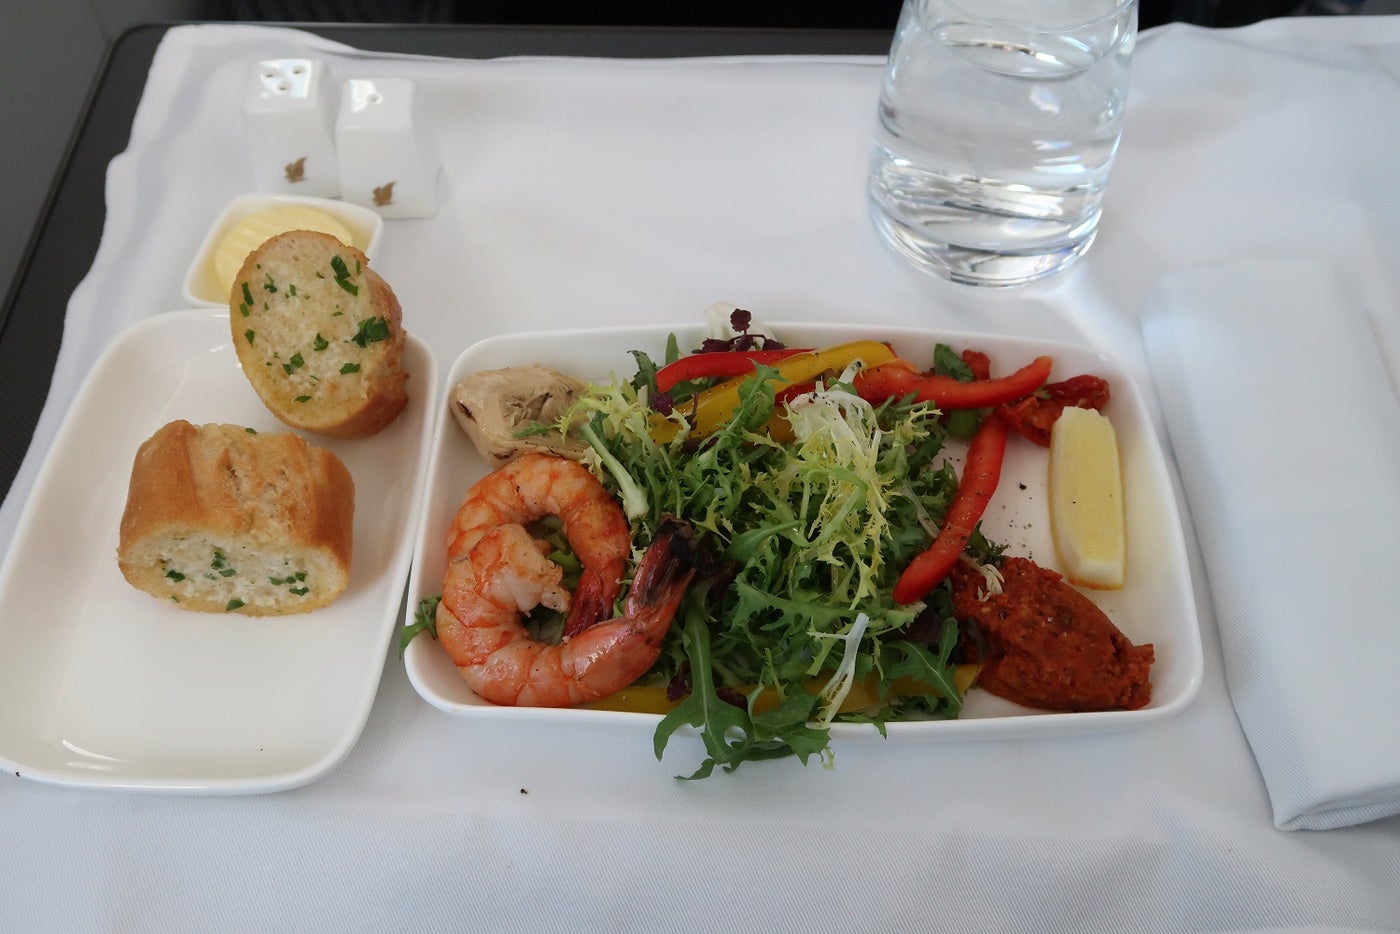 Review: Gulf Air (787-9) Business Class From LHR to Bahrain